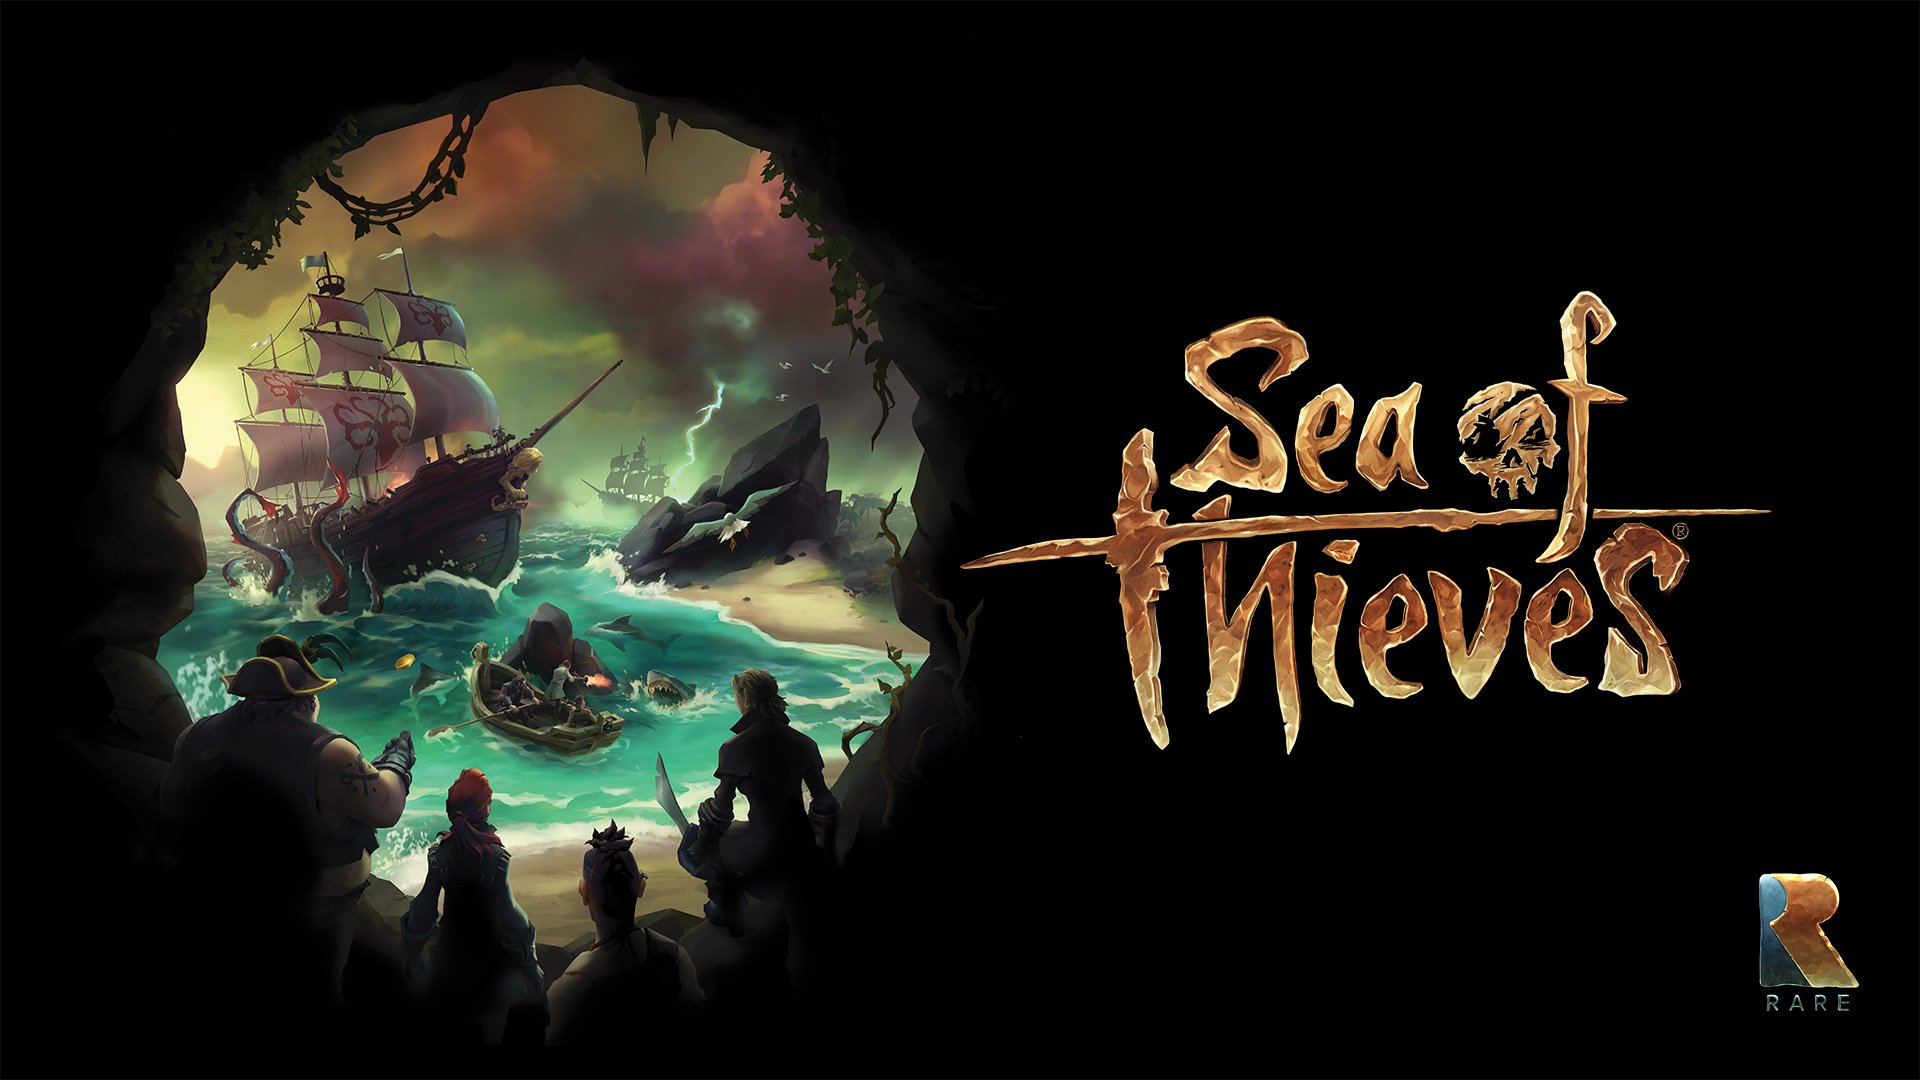 Developer Update Teases New Sea of Thieves Content